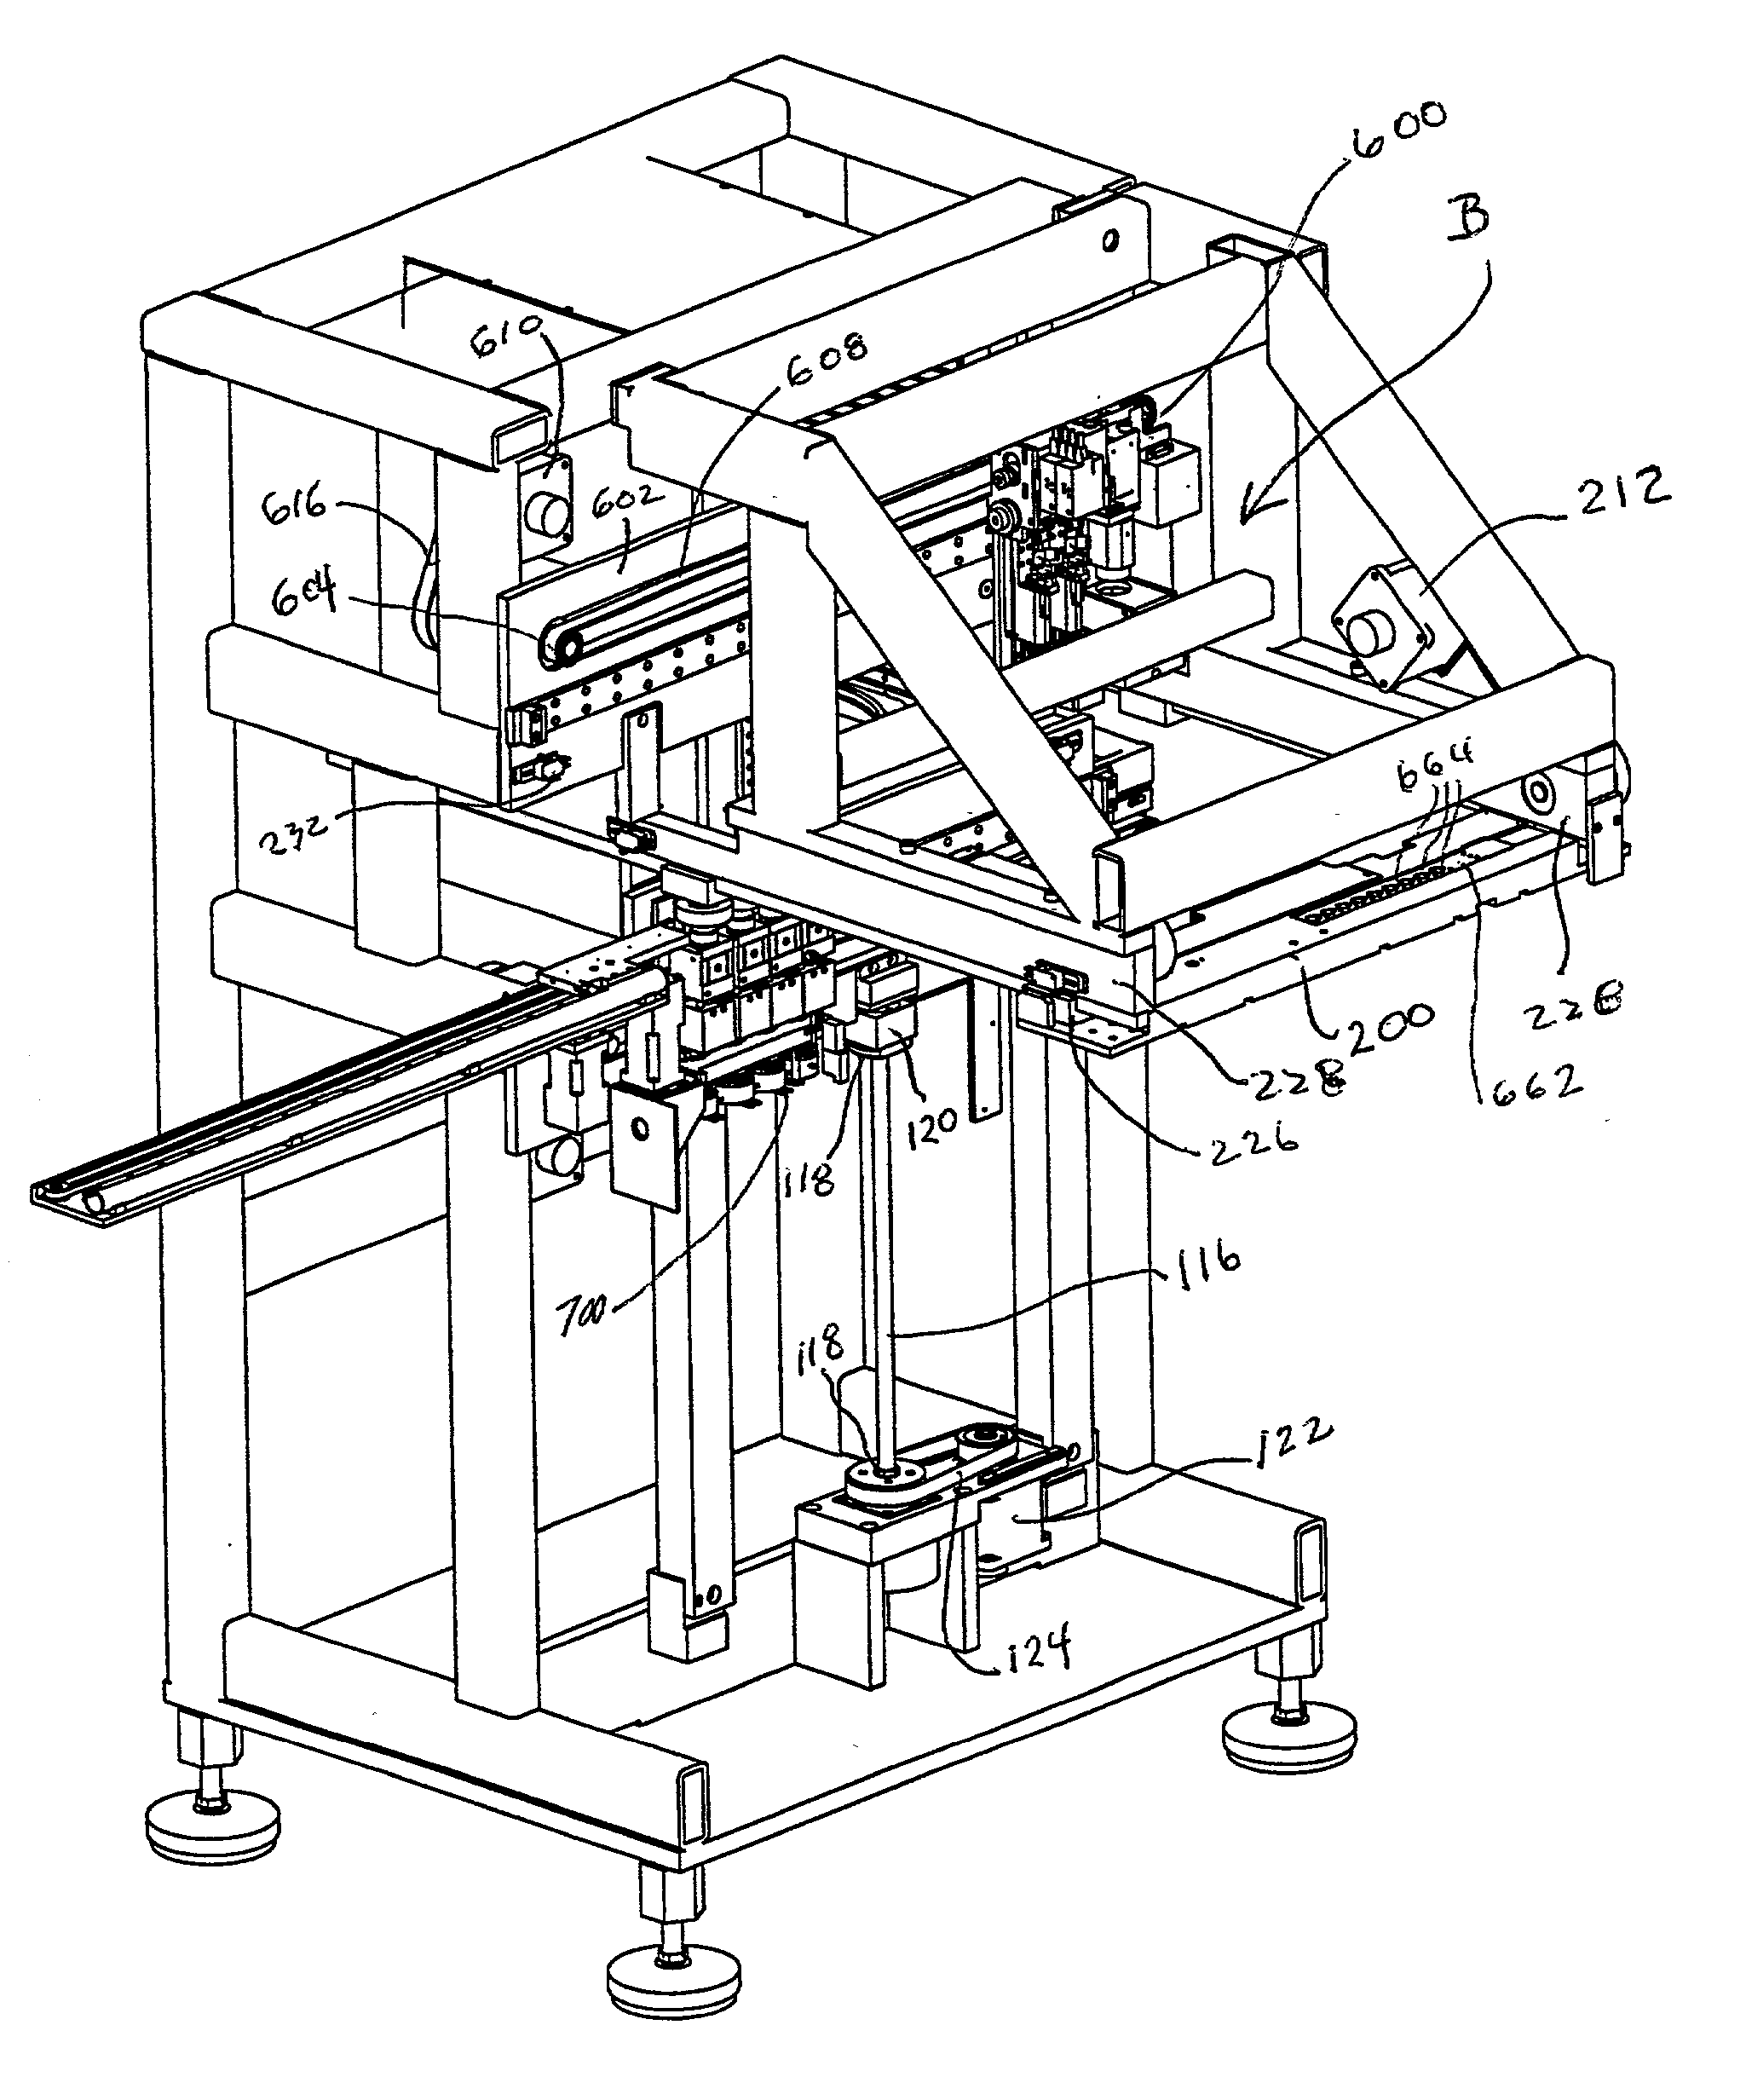 Methods and apparatus for transferring electrical components